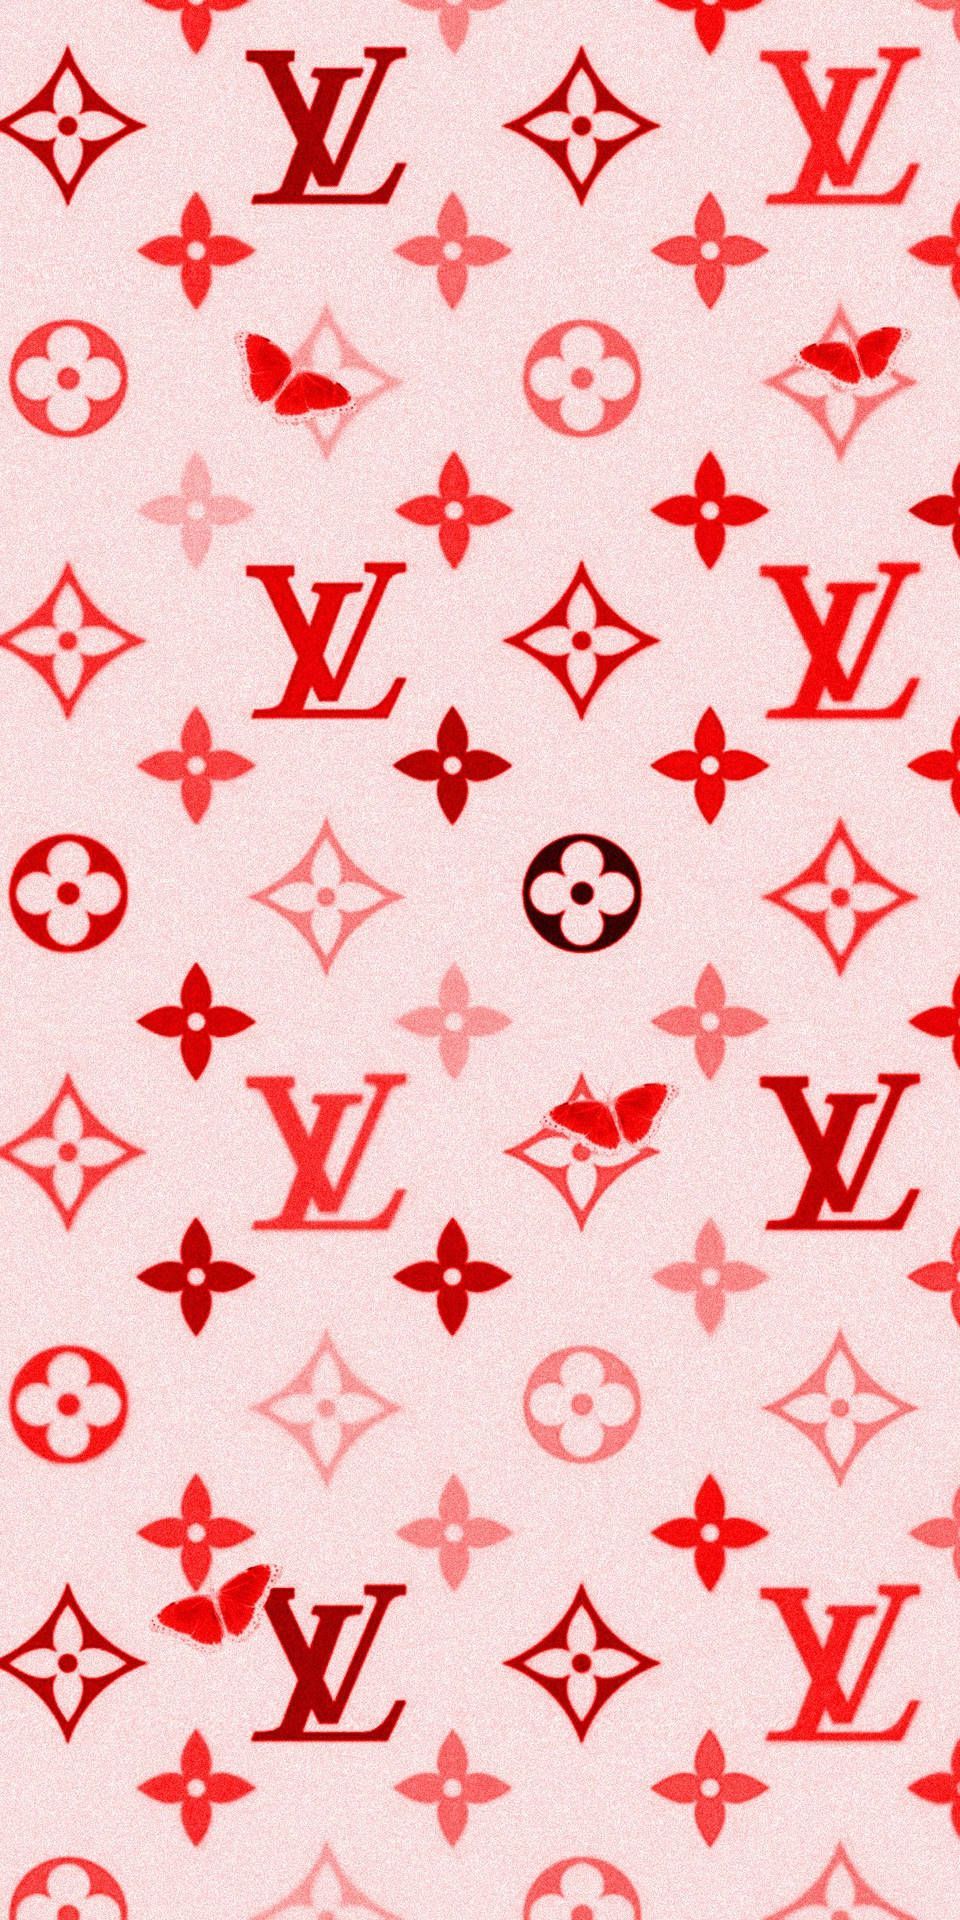 Download Glamorous And Chic The Elegance Of Louis Vuitton Aesthetic Wallpaper